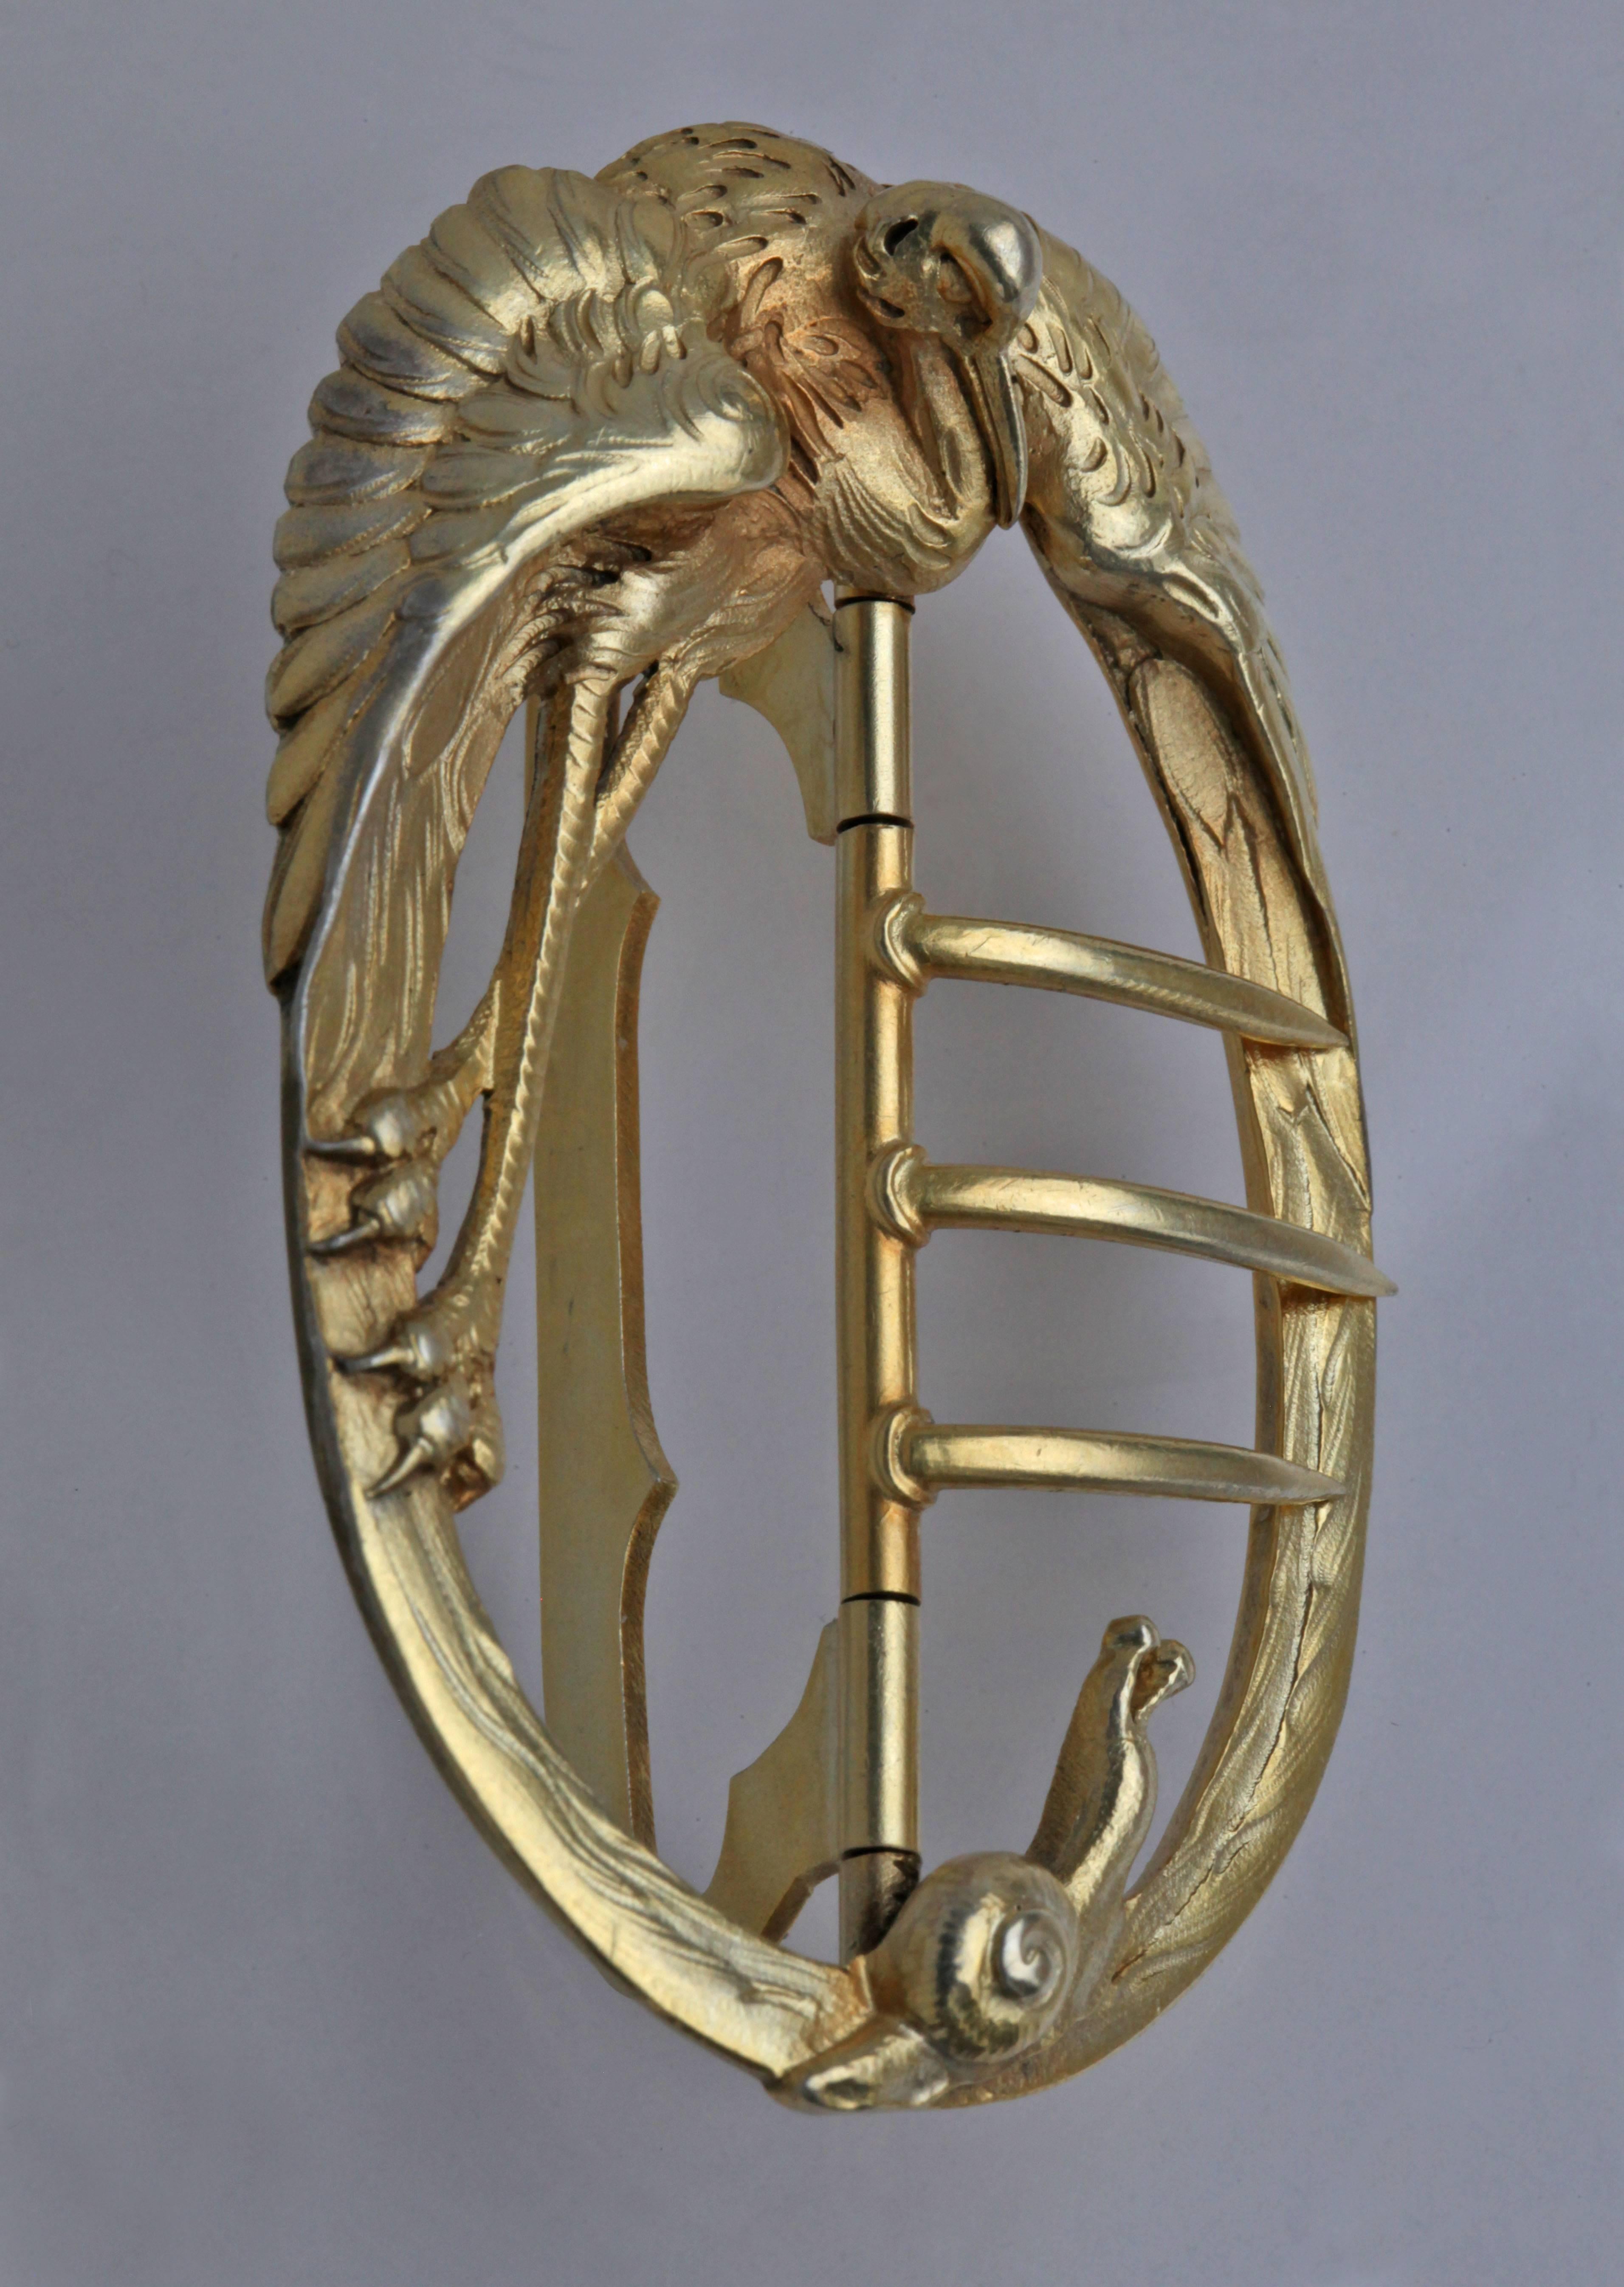 A well documented Art Nouveau buckle illustrating the fable of 'The Heron & the Snail'.
The moral of this fable by La Fontaine is 